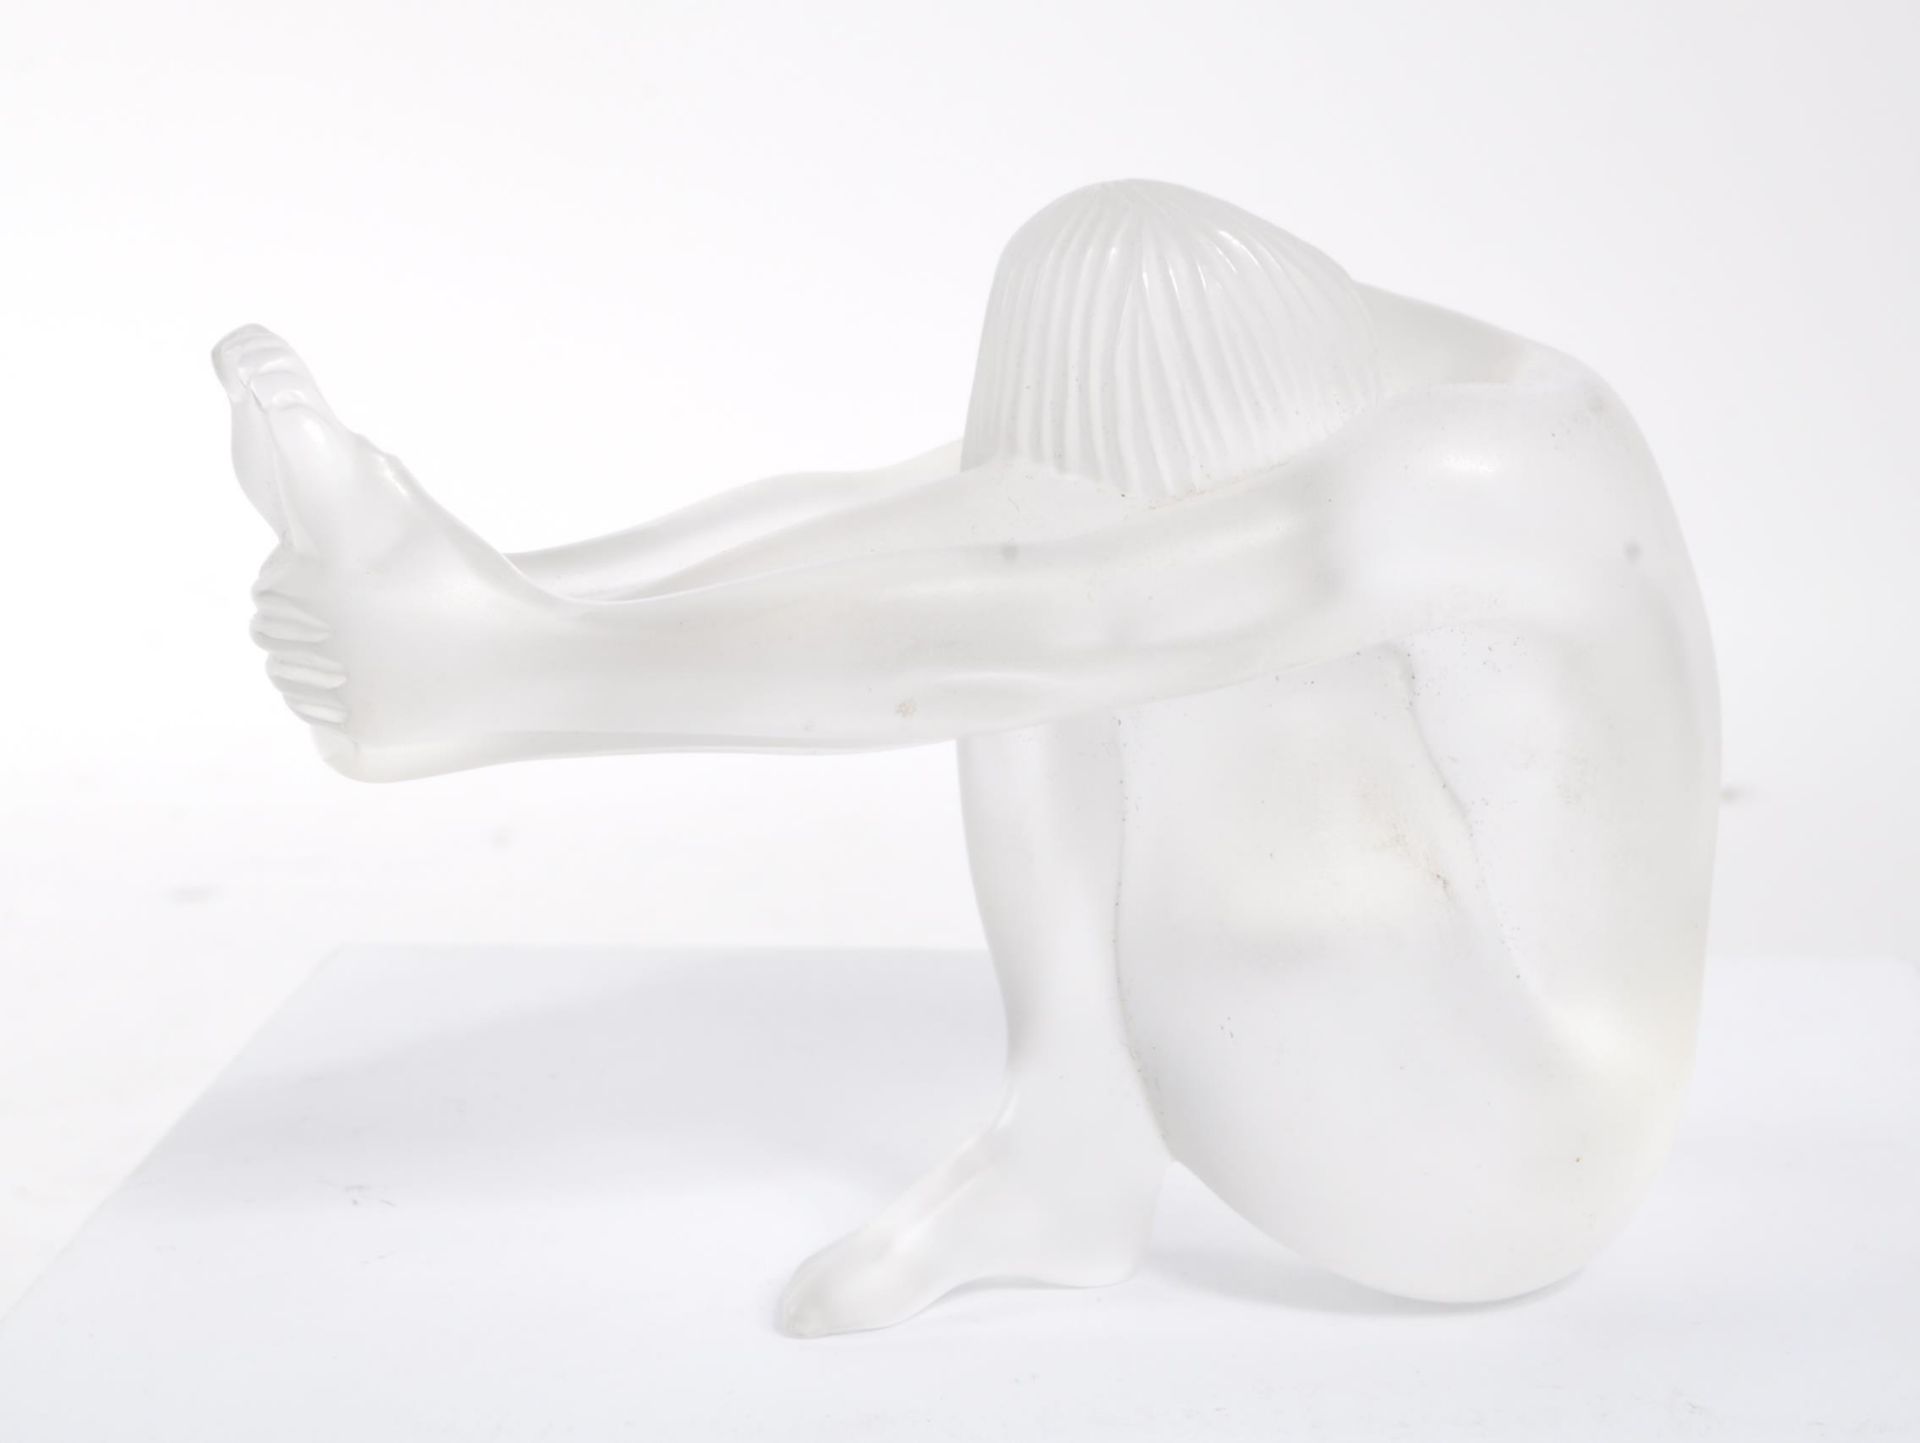 LALIQUE - STUDIO FROSTED ART GLASS OF NUDE FEMALE - Image 2 of 4